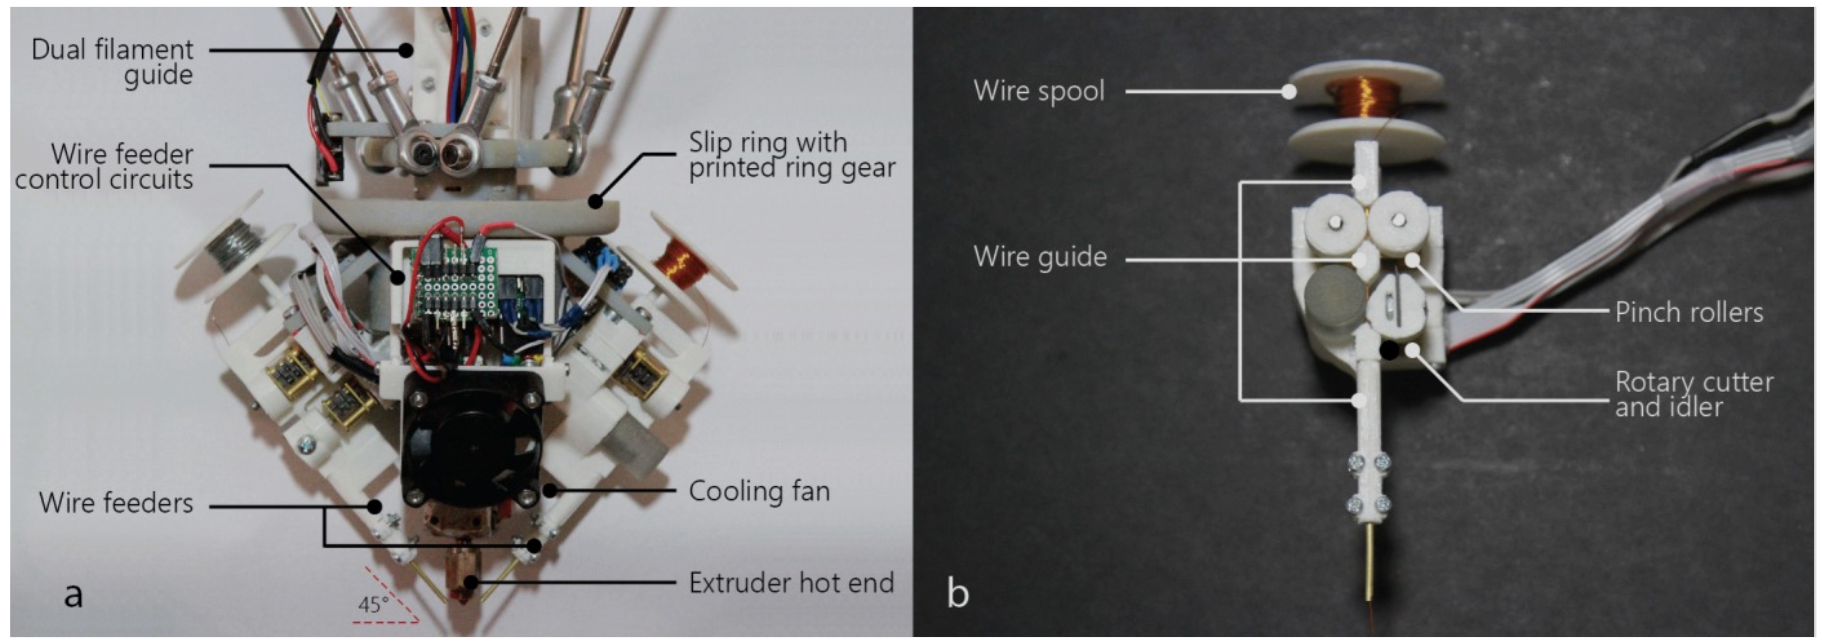 a-3d-printer-for-interactive-electromagnetic-devices-image